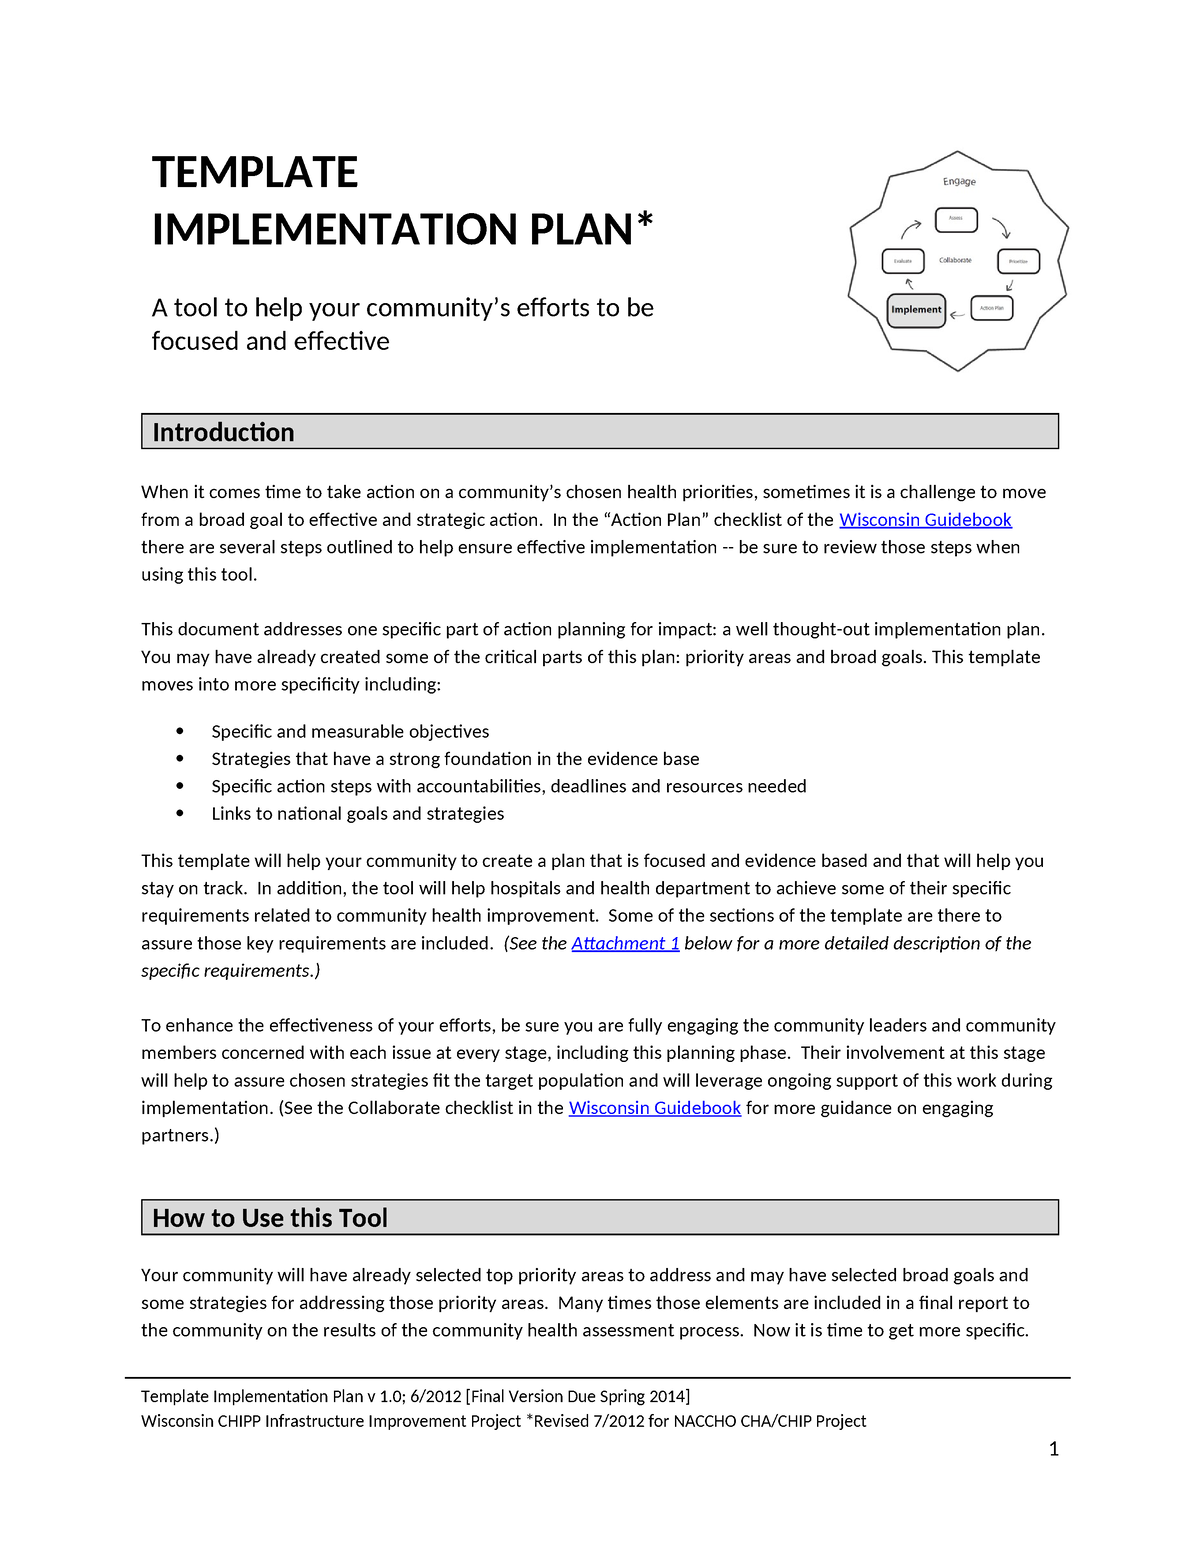 Implementation Plan Template - TEMPLATE IMPLEMENTATION PLAN* A tool to ...